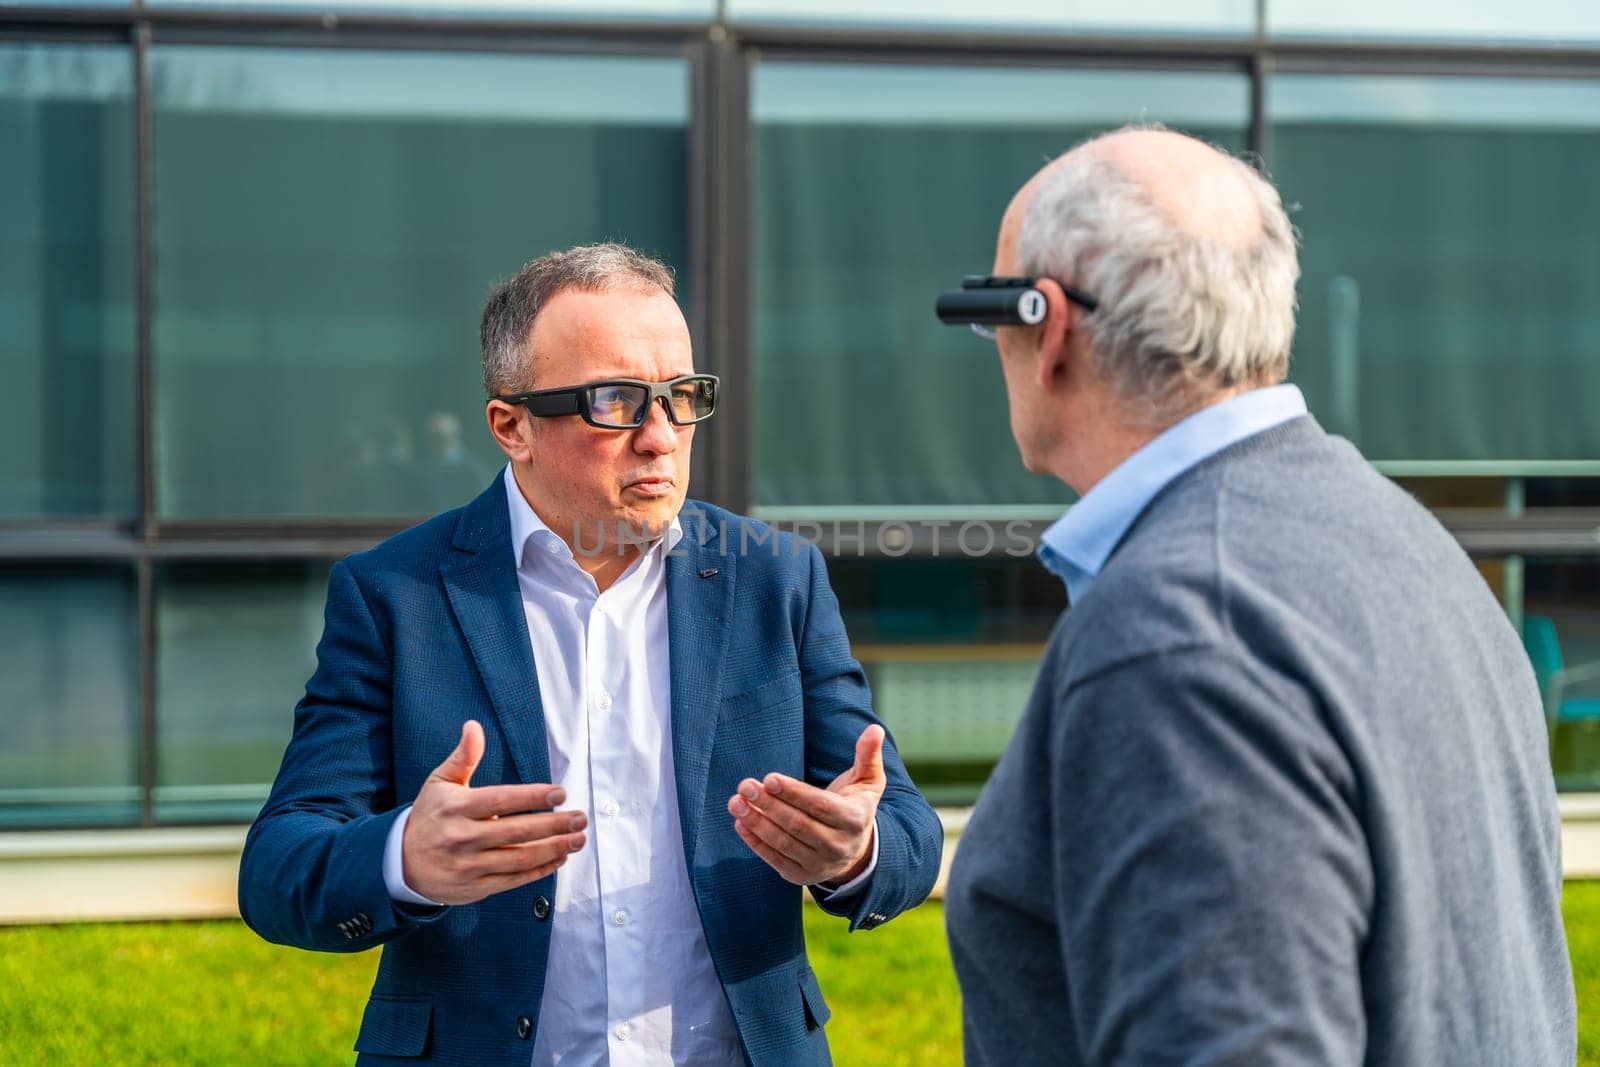 Aged businessmen coworkers using an augmented reality device while talking outdoors